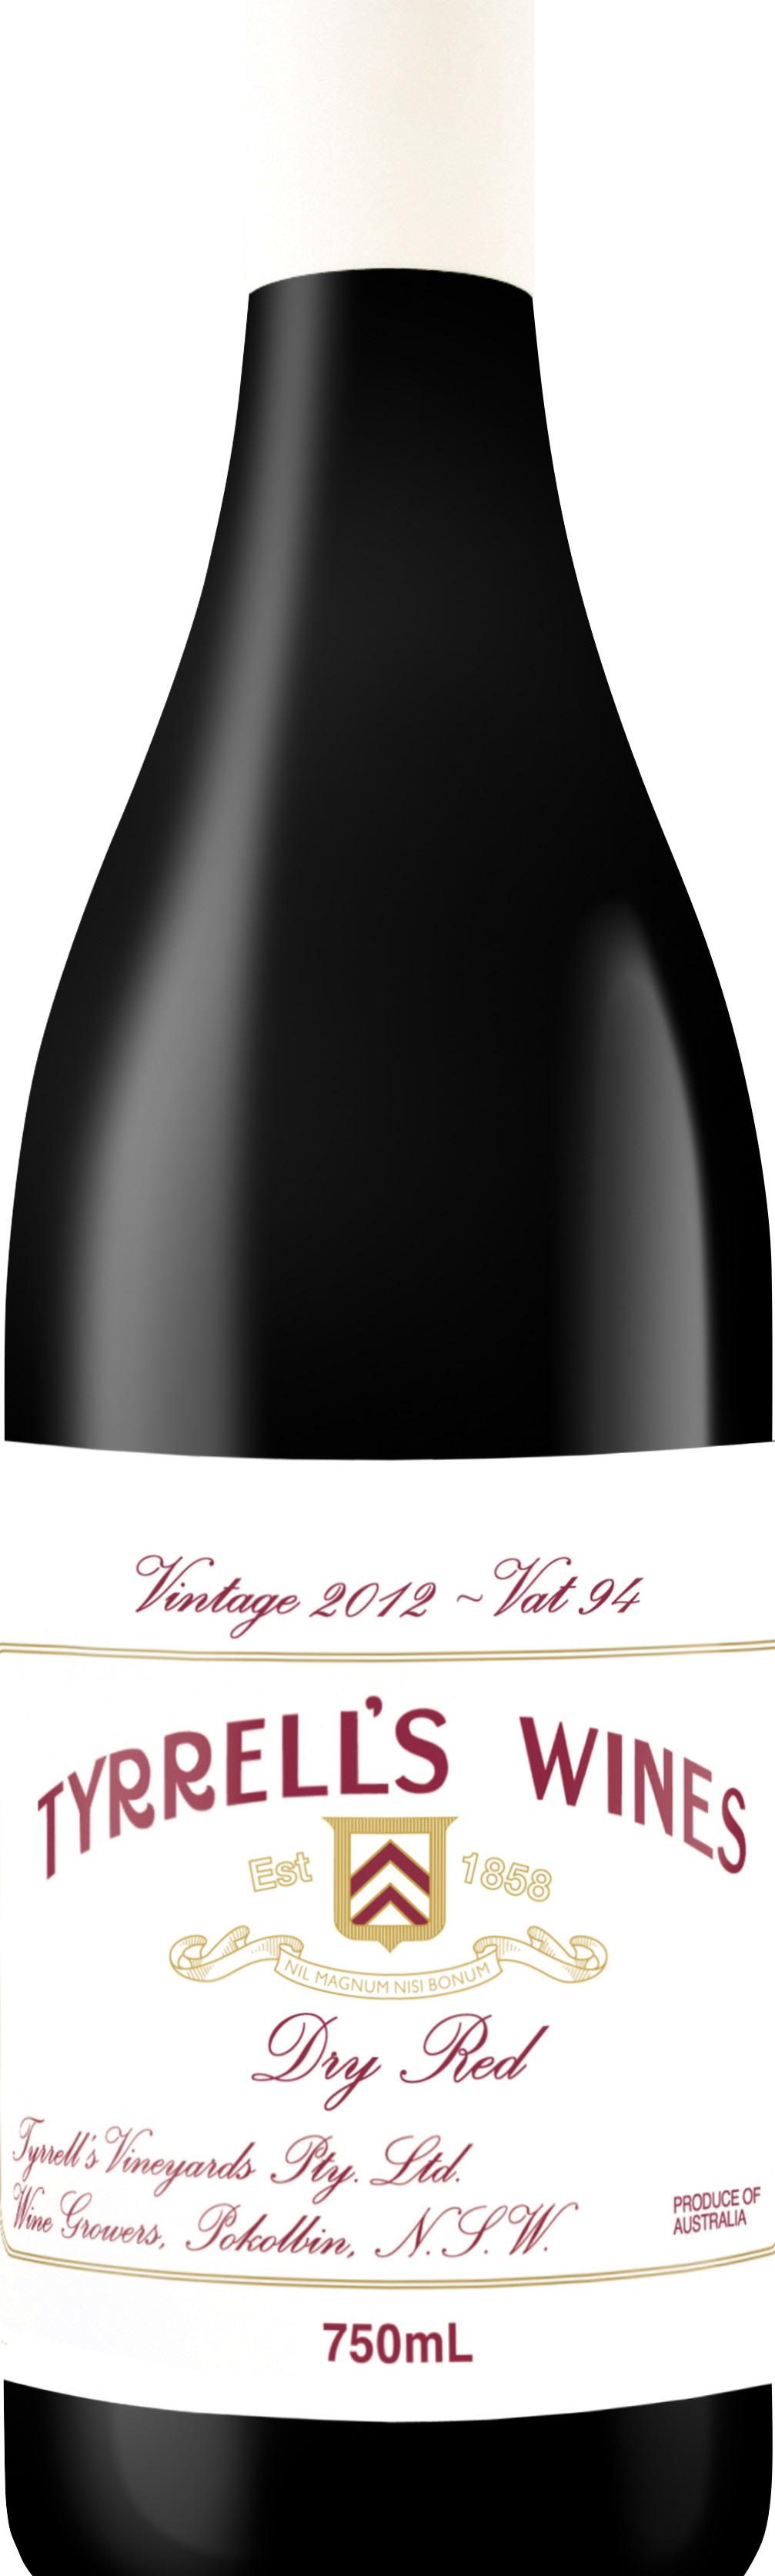 A unique wine from a unique vintage PRIVATE BIN RED 2012 RELEASE VAT 94 DRY RED 2012 We explore Australia s long history of premium multi regional and multi